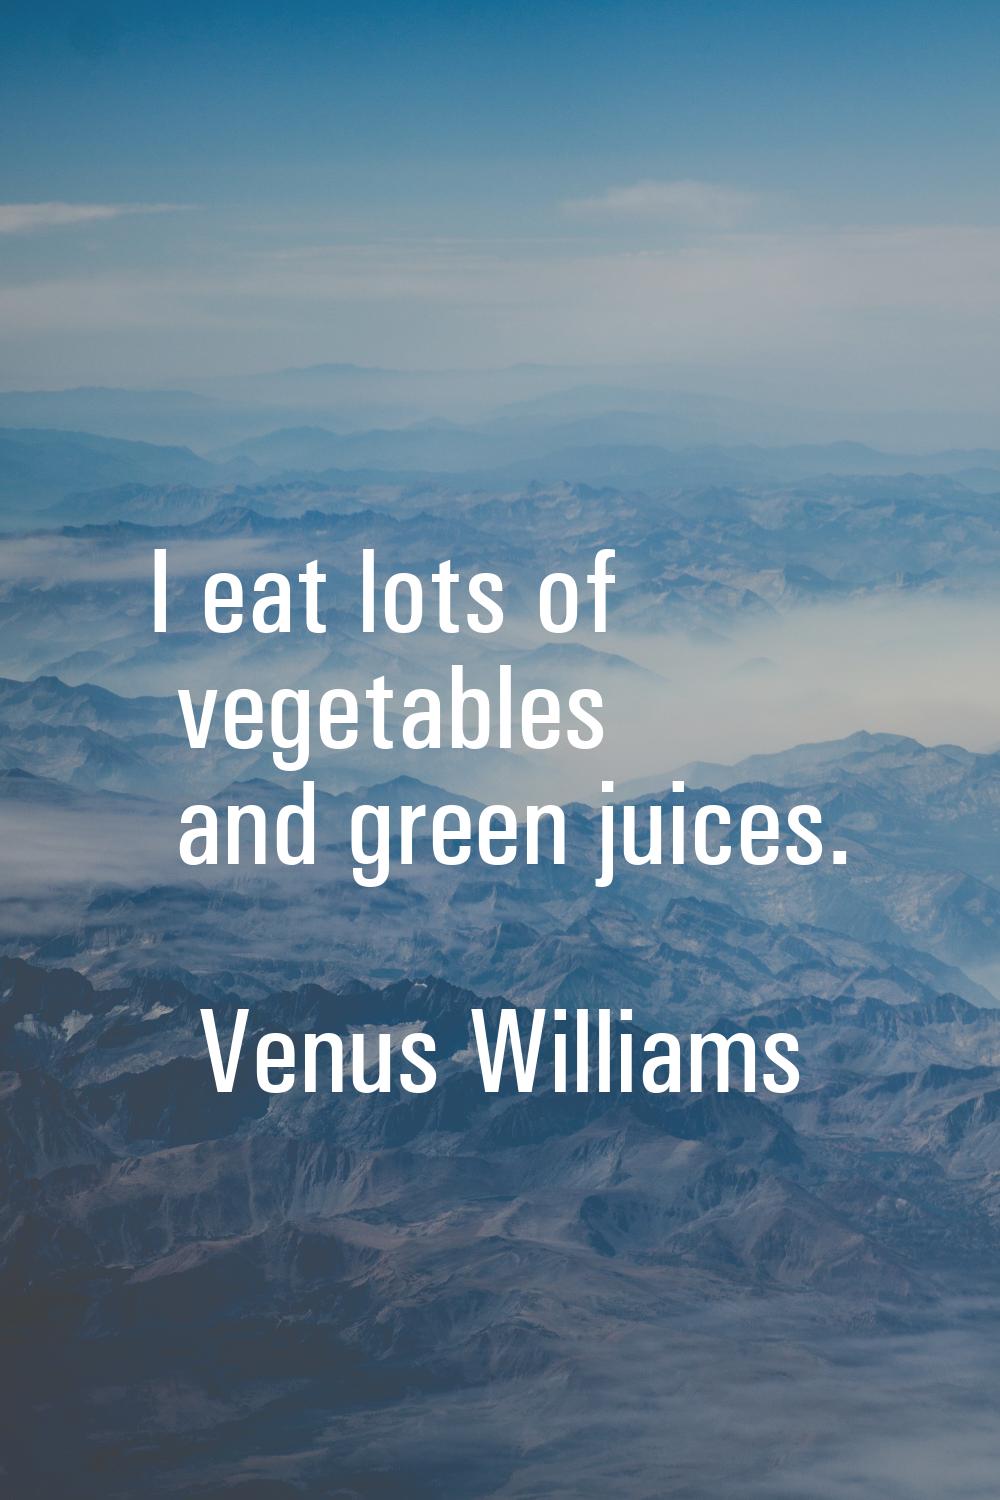 I eat lots of vegetables and green juices.